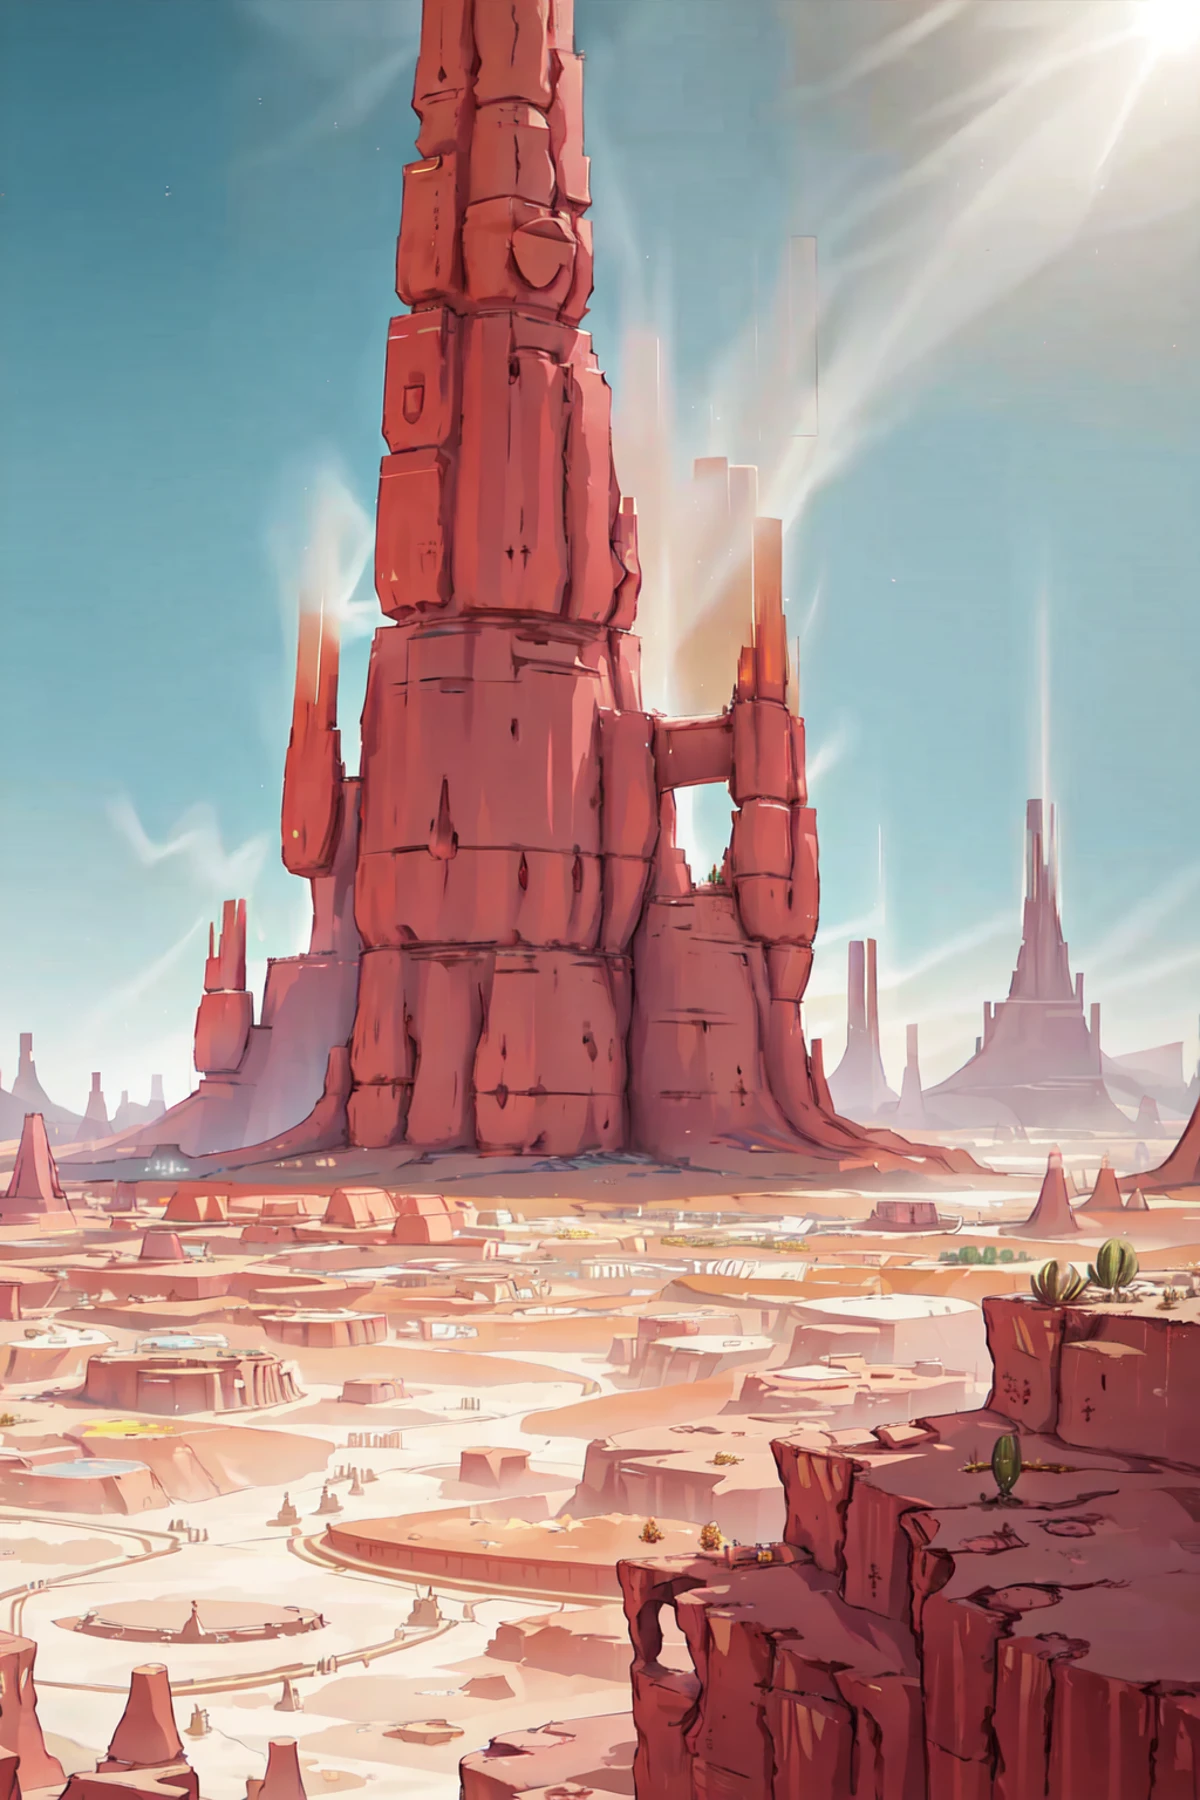 limco style, a desert with a few buildings and a sky, liminal horror space, extreme light and shadow, no humans